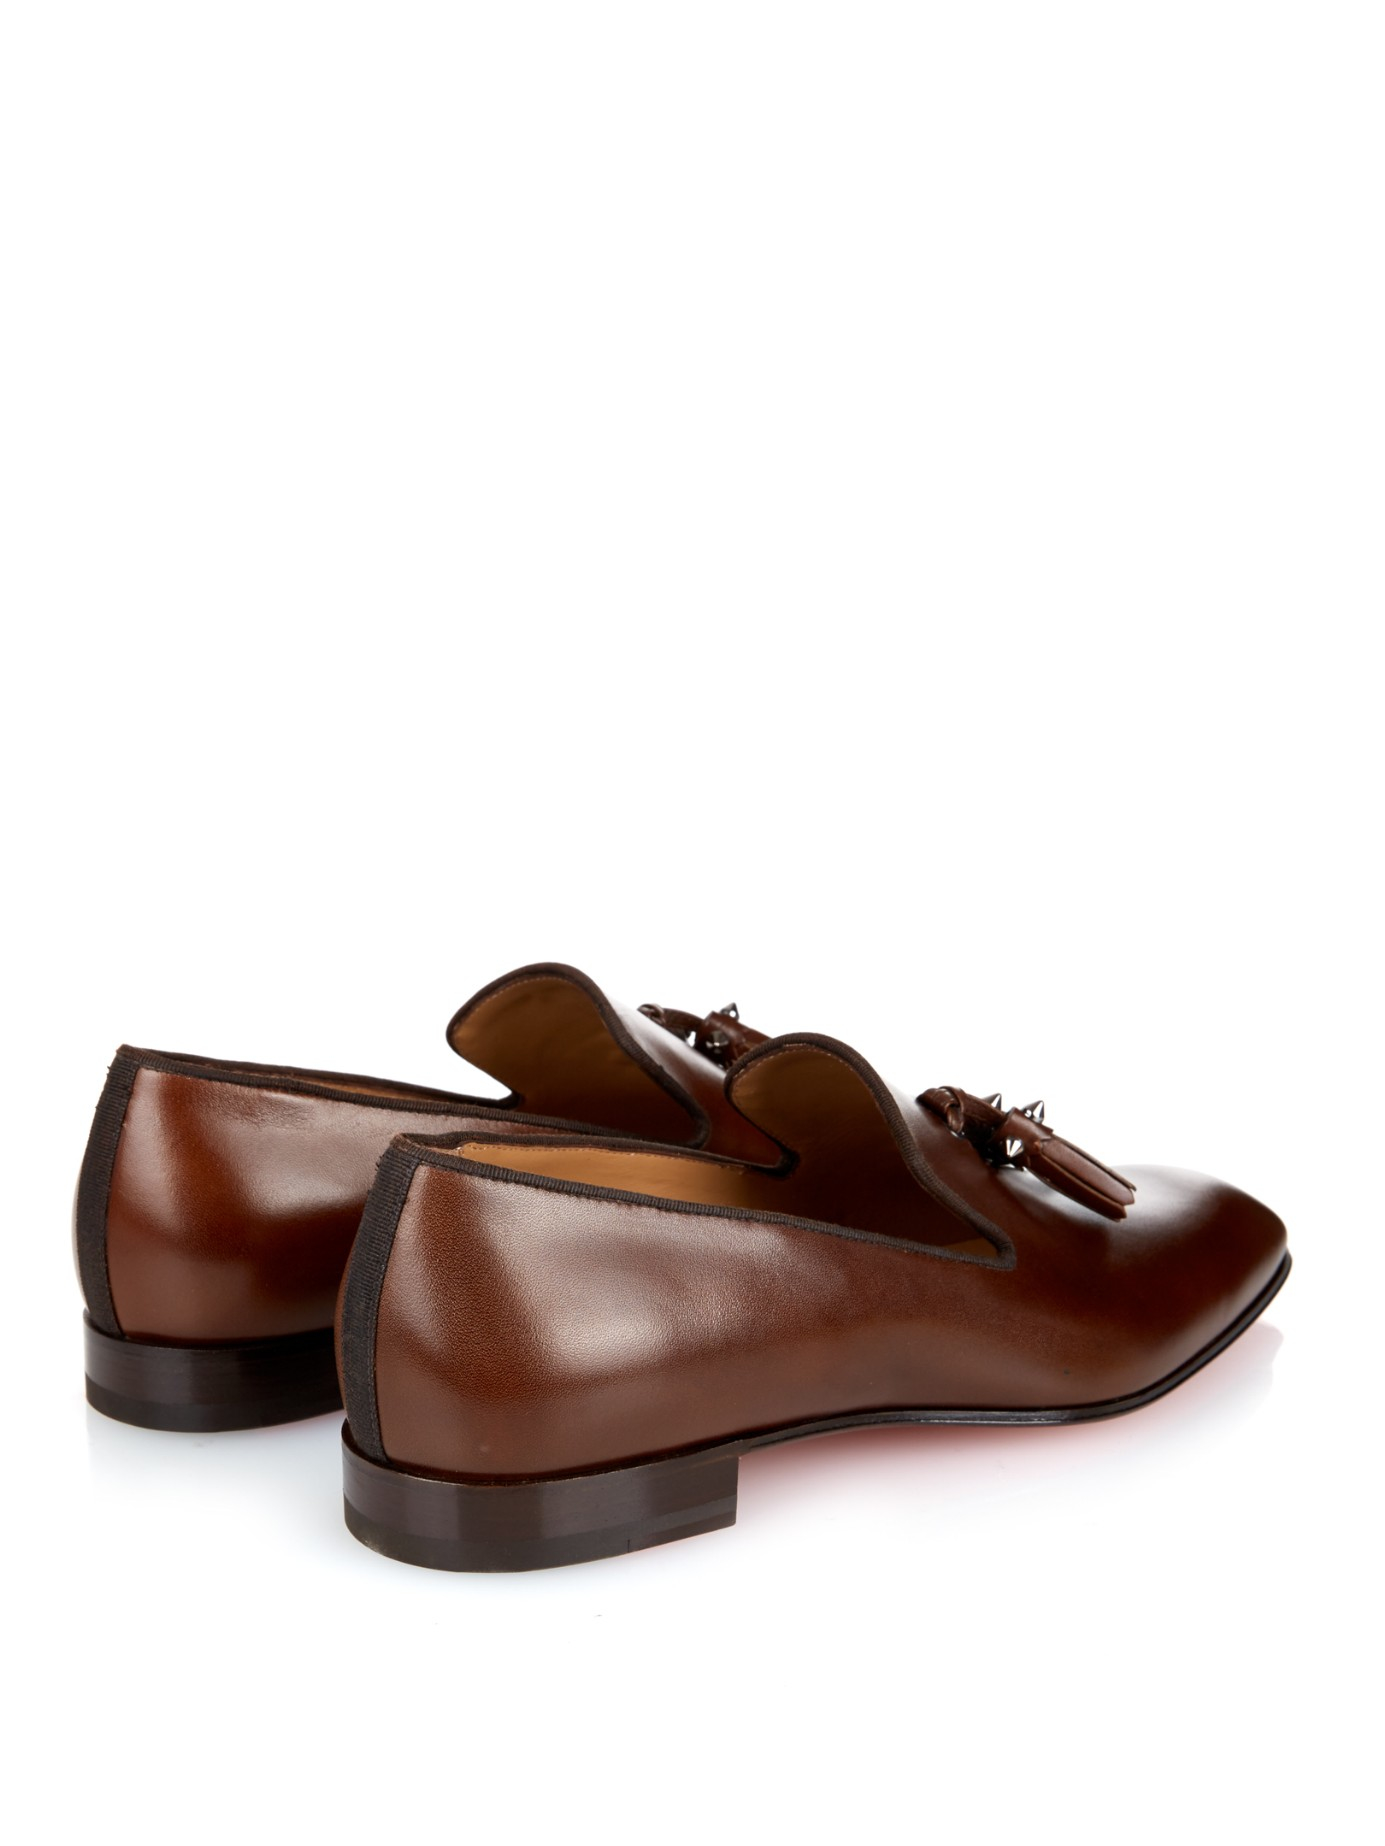 Christian Louboutin Dandelion Leather Loafers in Brown for Men Lyst